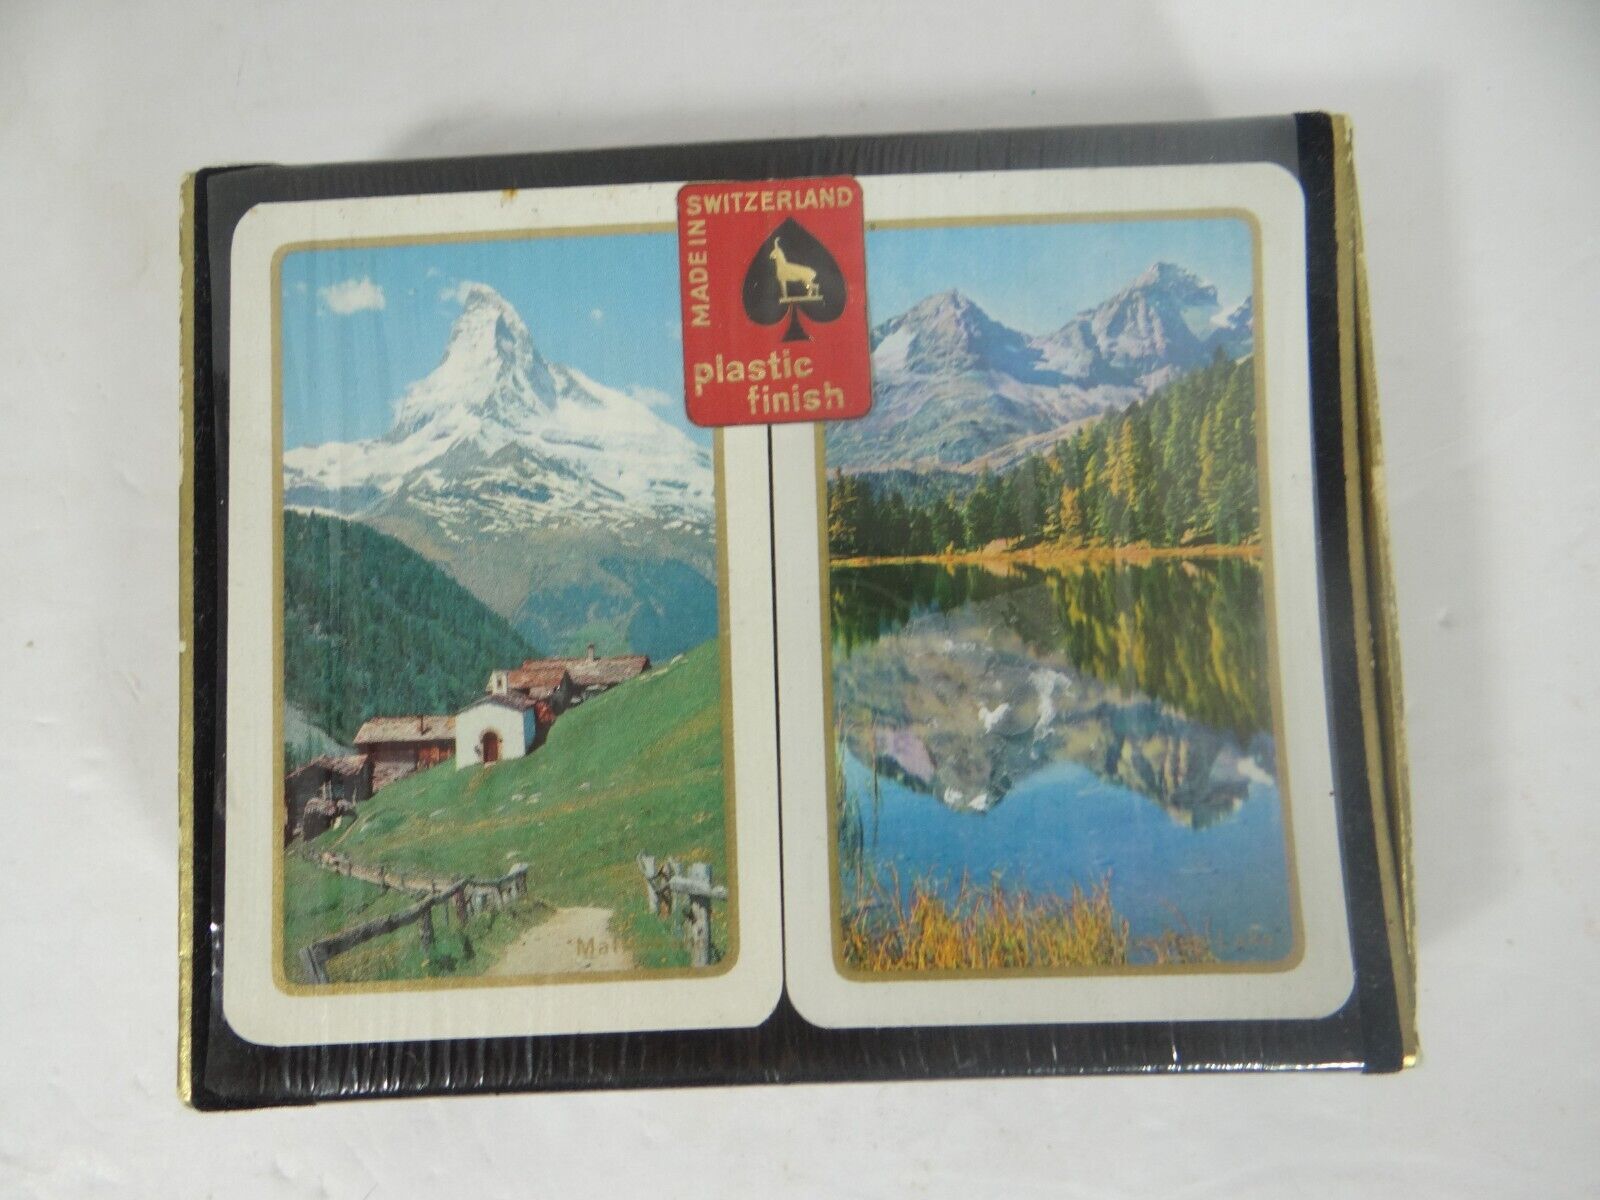 Vintage Finest Swiss Playing Cards Double Deck Matterhorn Engadine Lake New